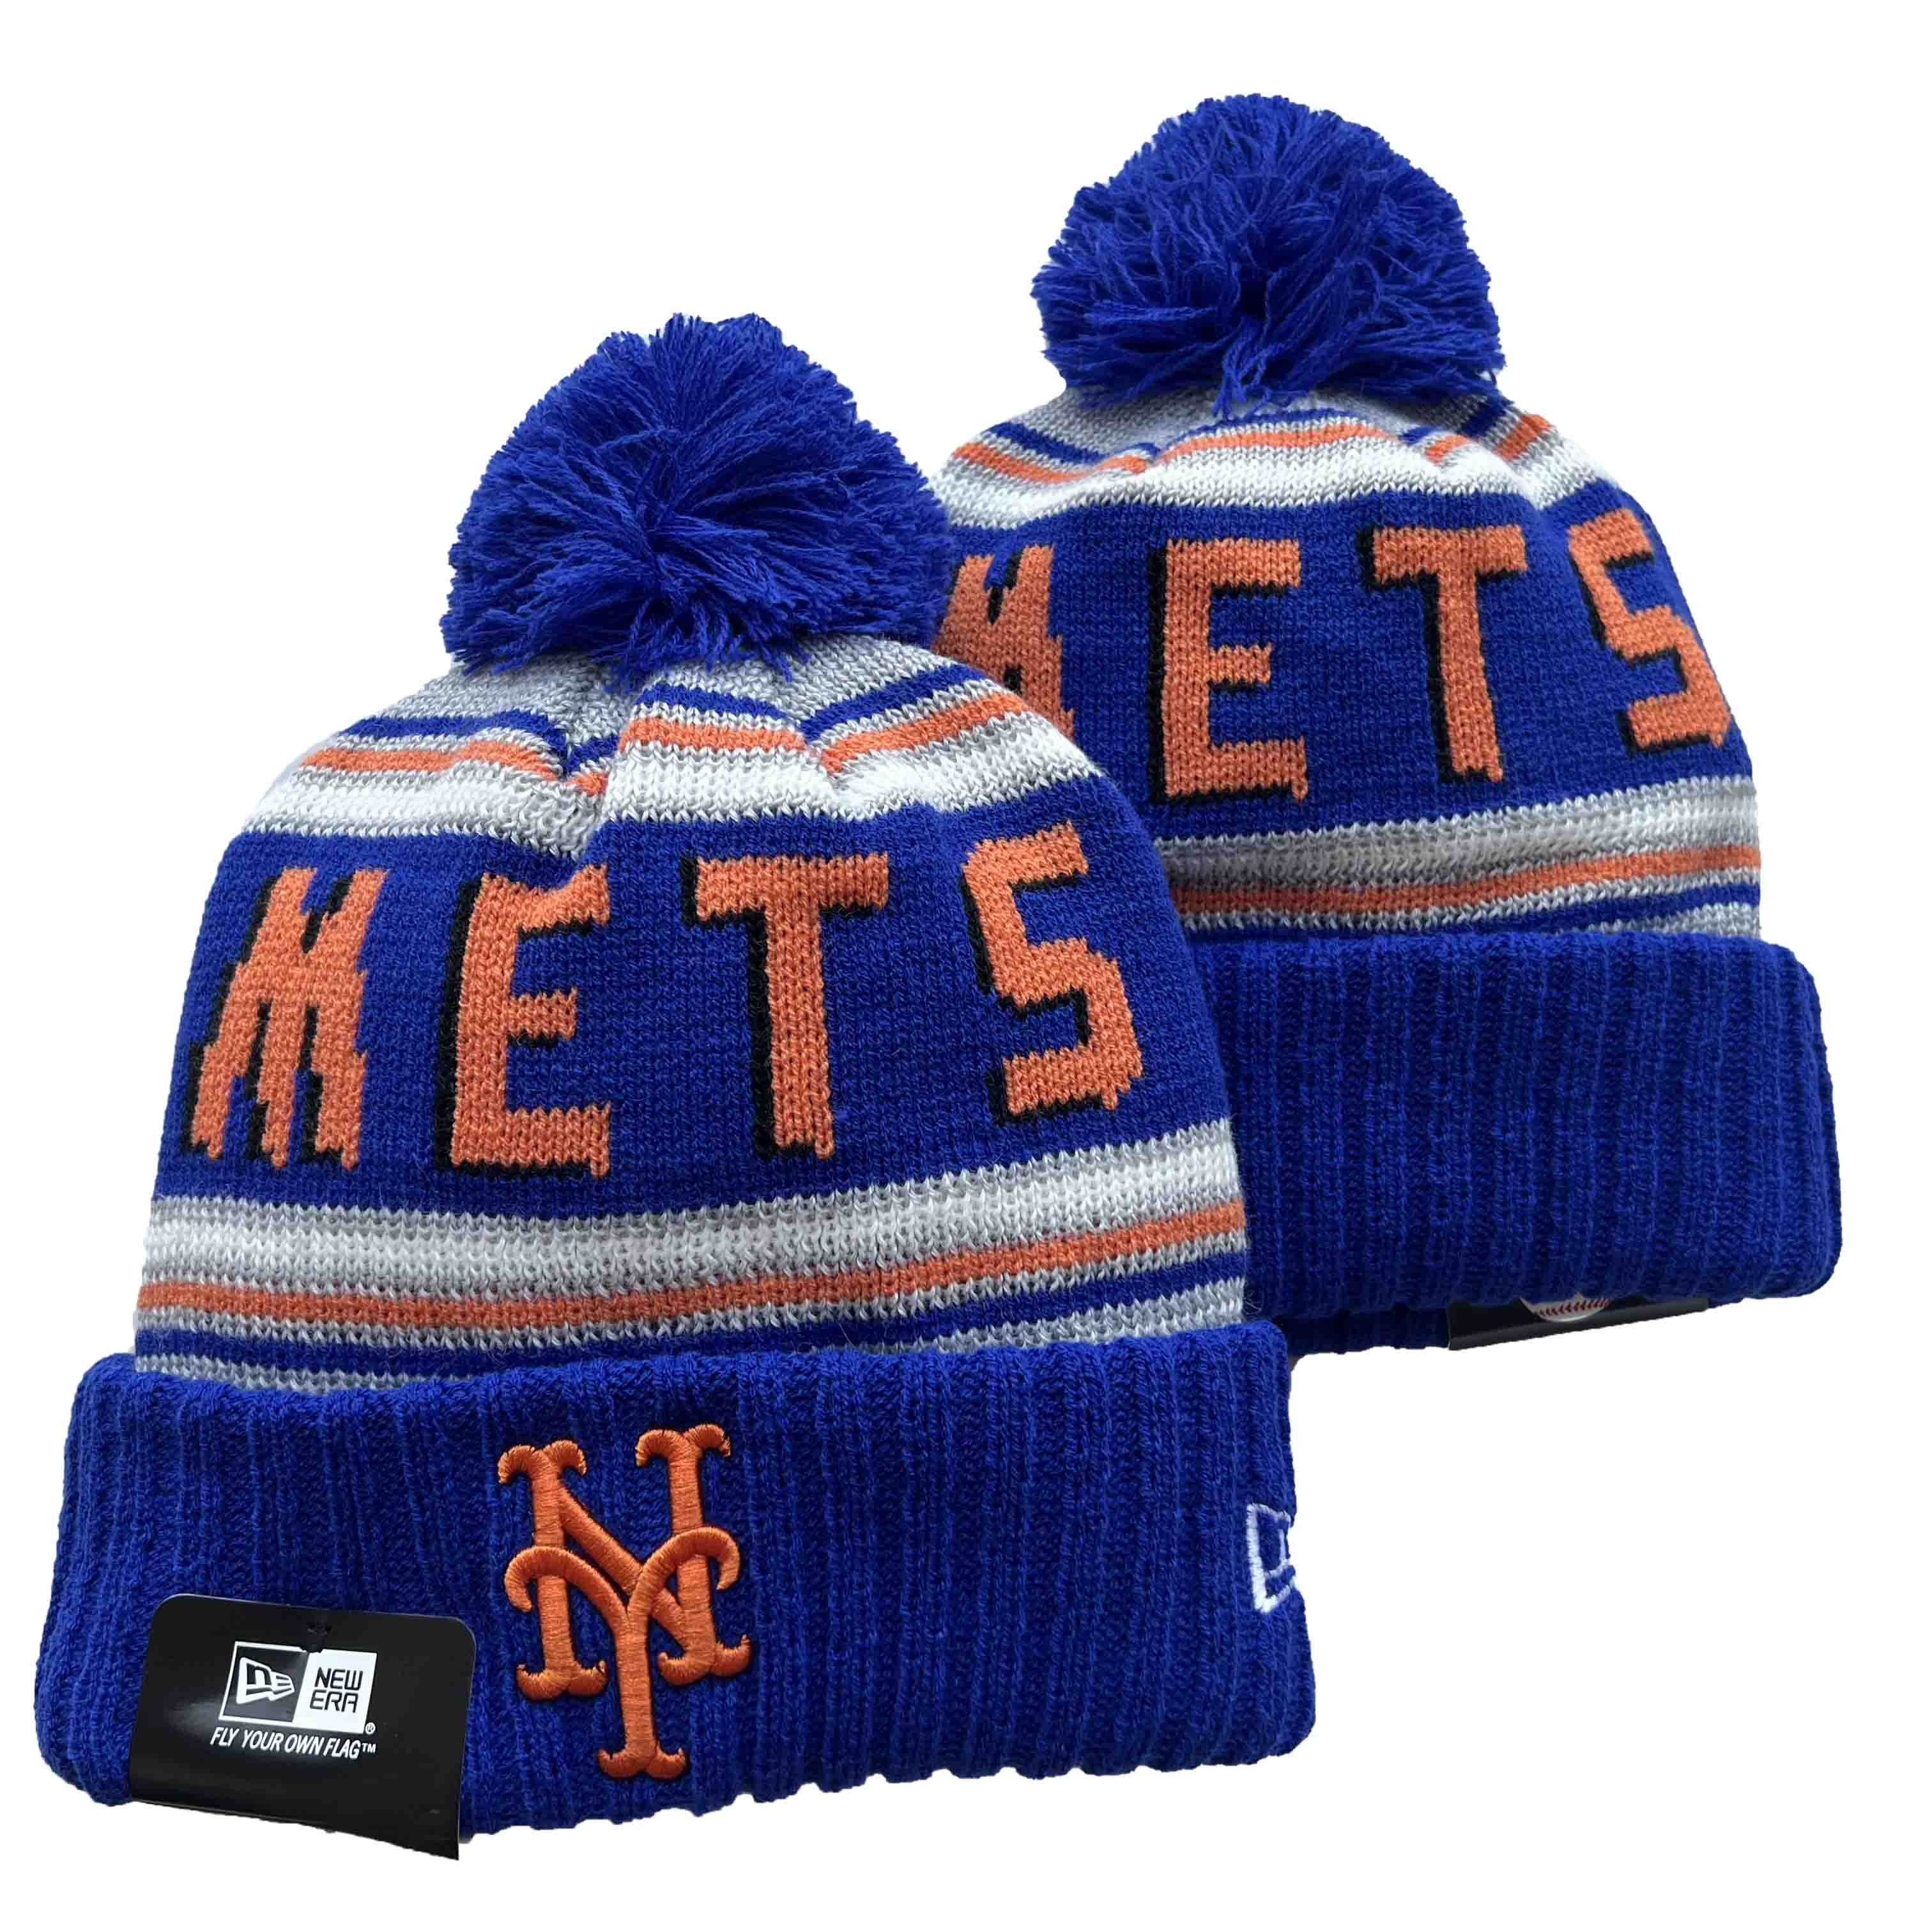 New York Mets Knit Hats -2